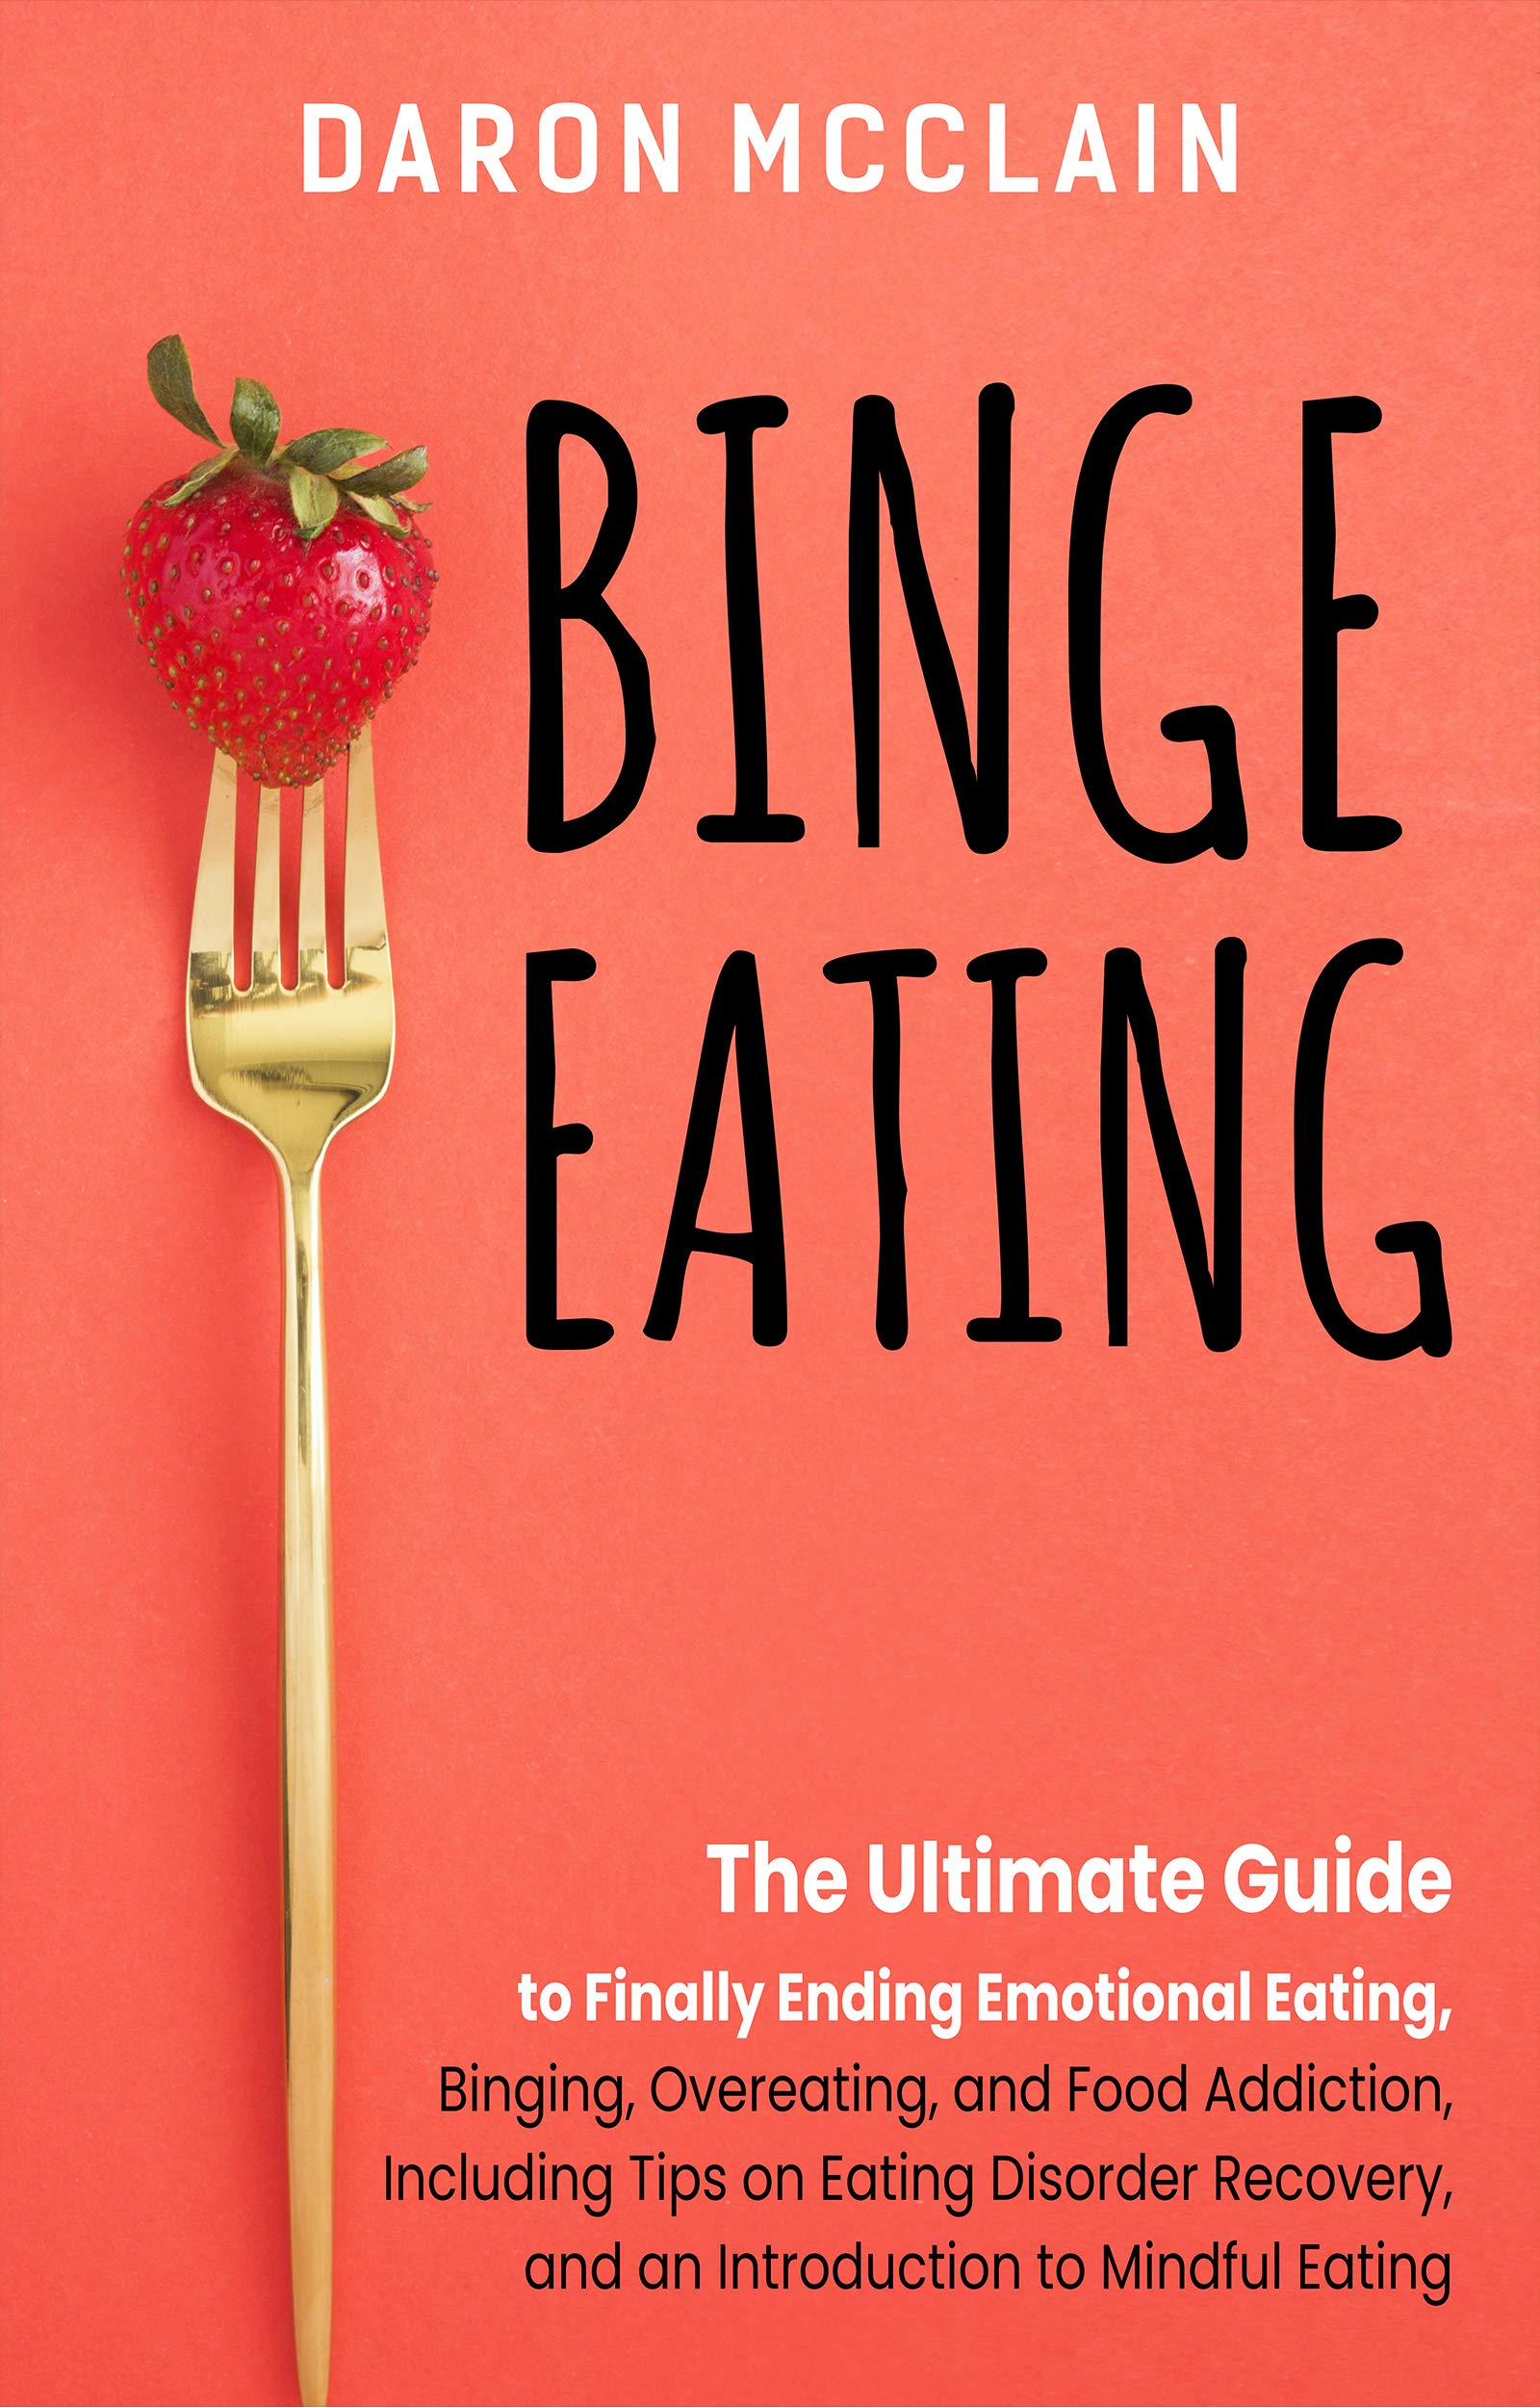 Binge Eating: The Ultimate Guide to Finally Ending Emotional Eating, Bingeing, Overeating, and Food Addiction, Including Tips on Eating Disorder Recovery, ... to Mindful Eating (Fasting Techniques)